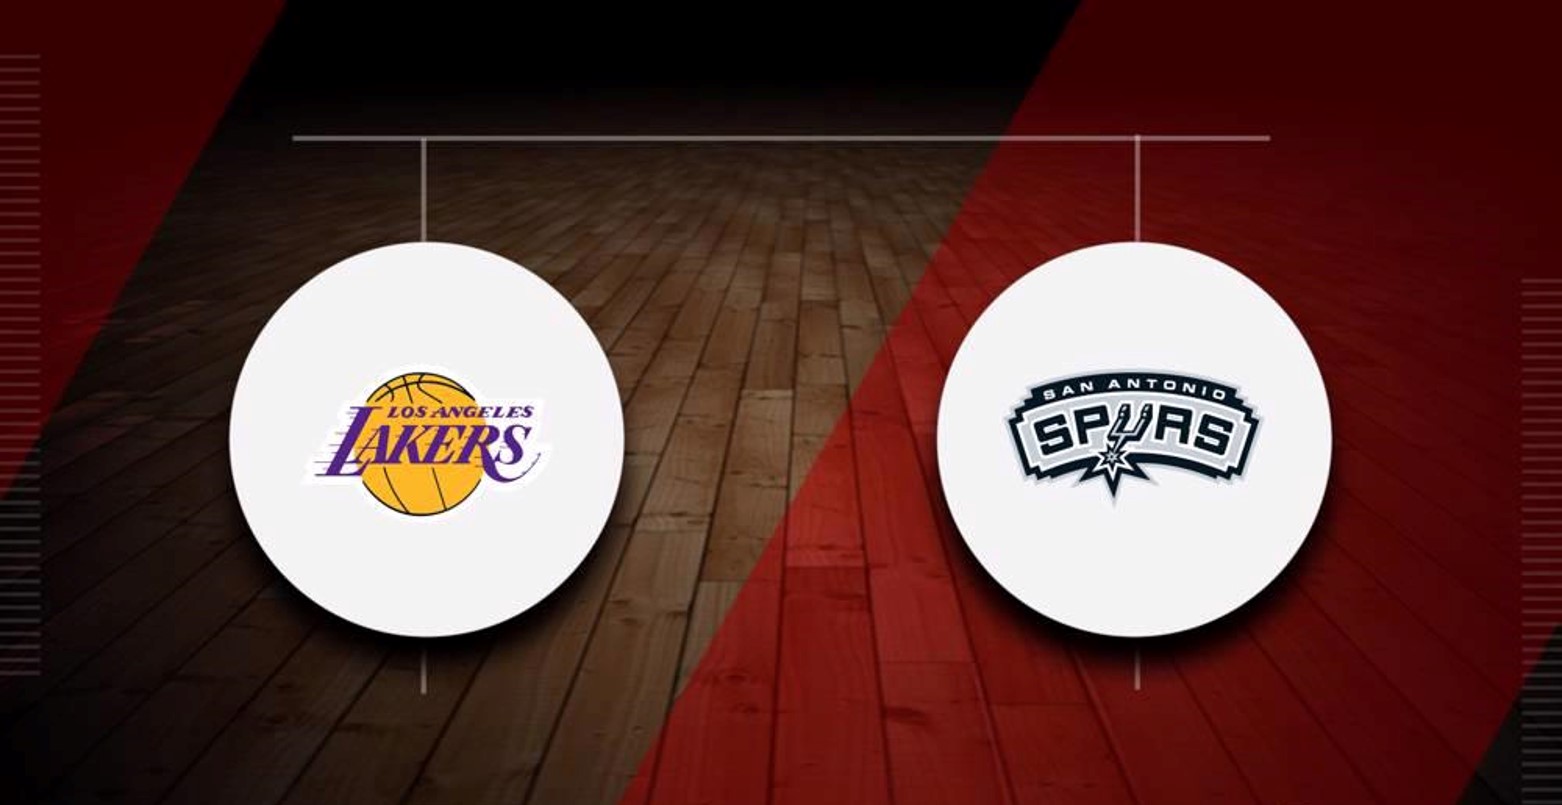 Los Angeles Lakers Vs San Antonio Spurs-Game Day Preview: 01.01.2021